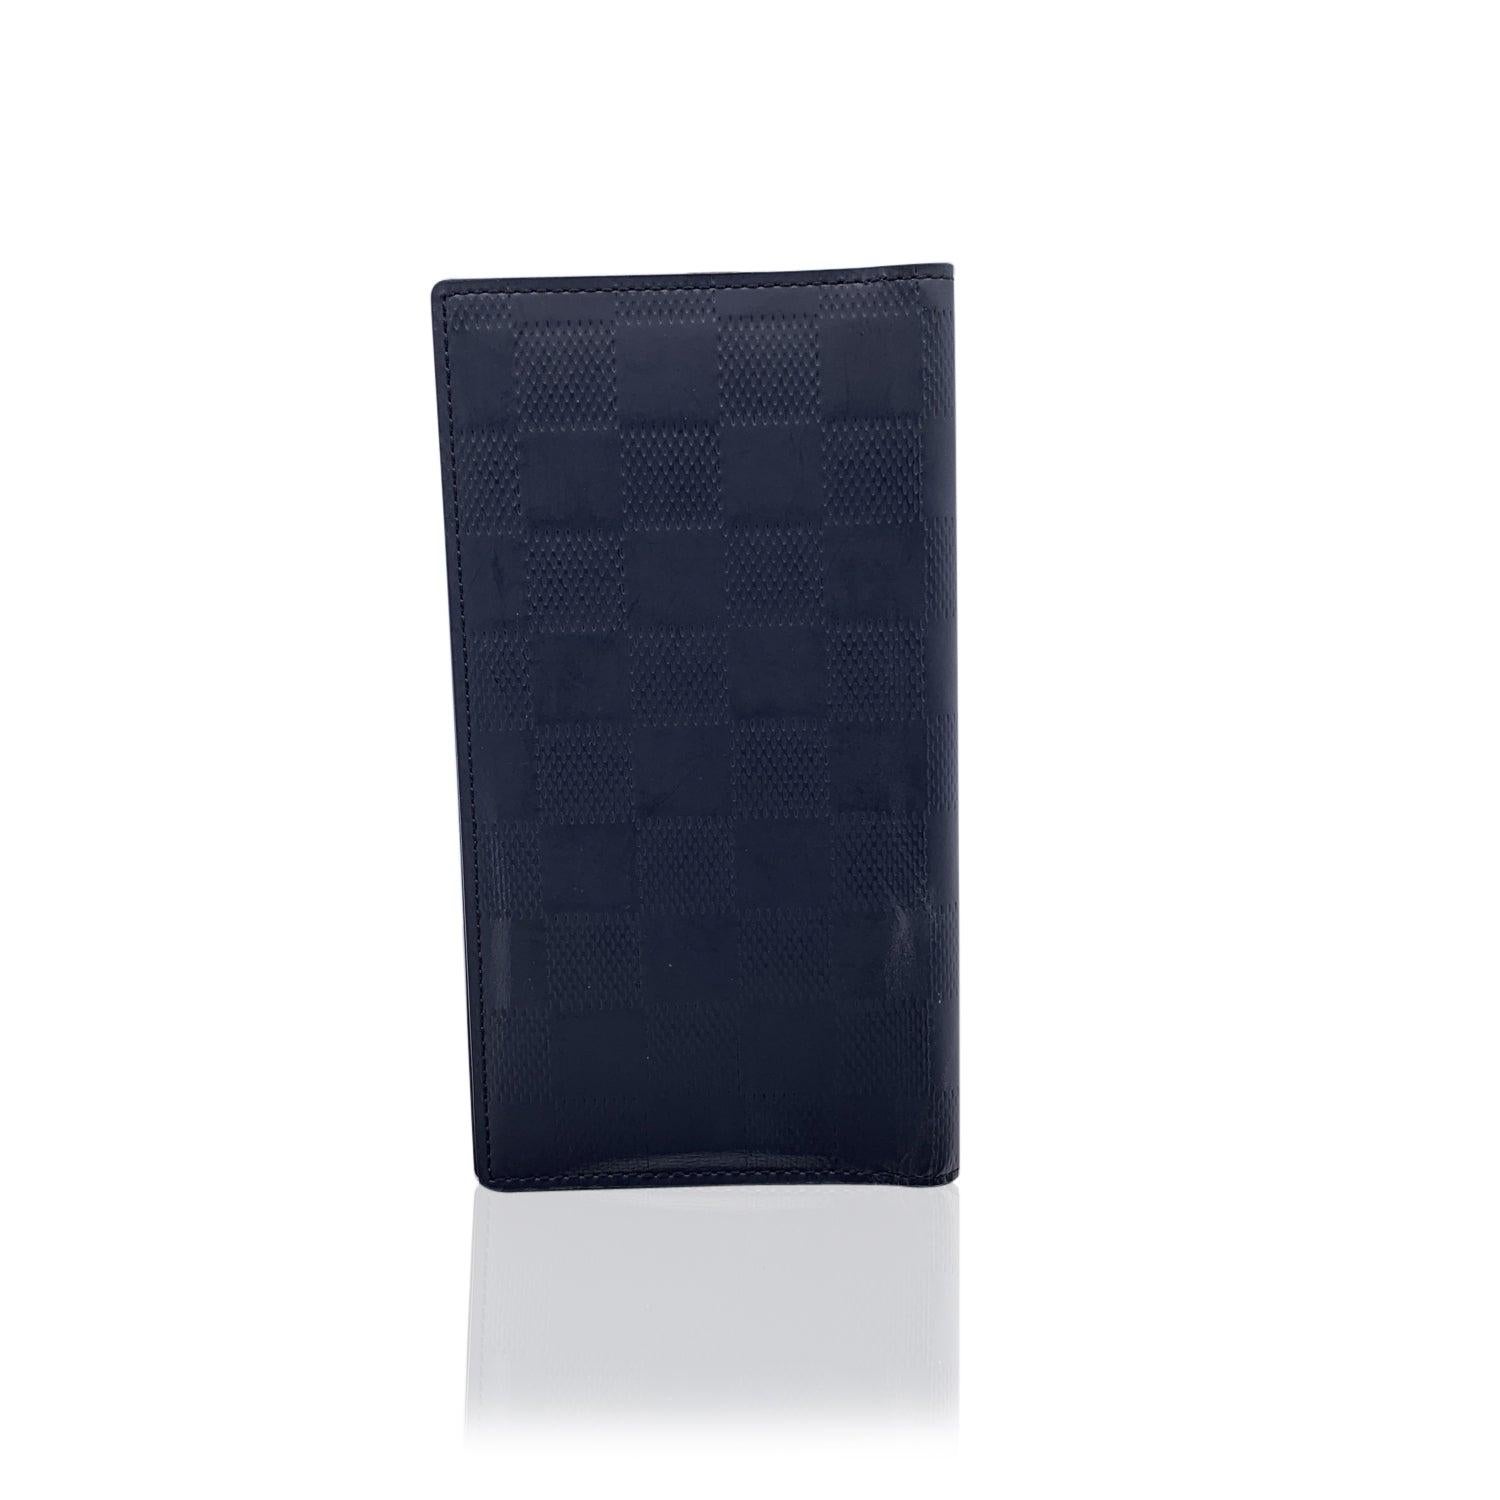 Louis Vuitton Black Damier Infini Vertical Wallet. 2 side pockets and 3 credit card slots inside. Authenticity Serial Number TH0061inside one of the pockets. 'LOUIS VUITTON Paris - made in France' engraved inside. Details MATERIAL: Leather COLOR: